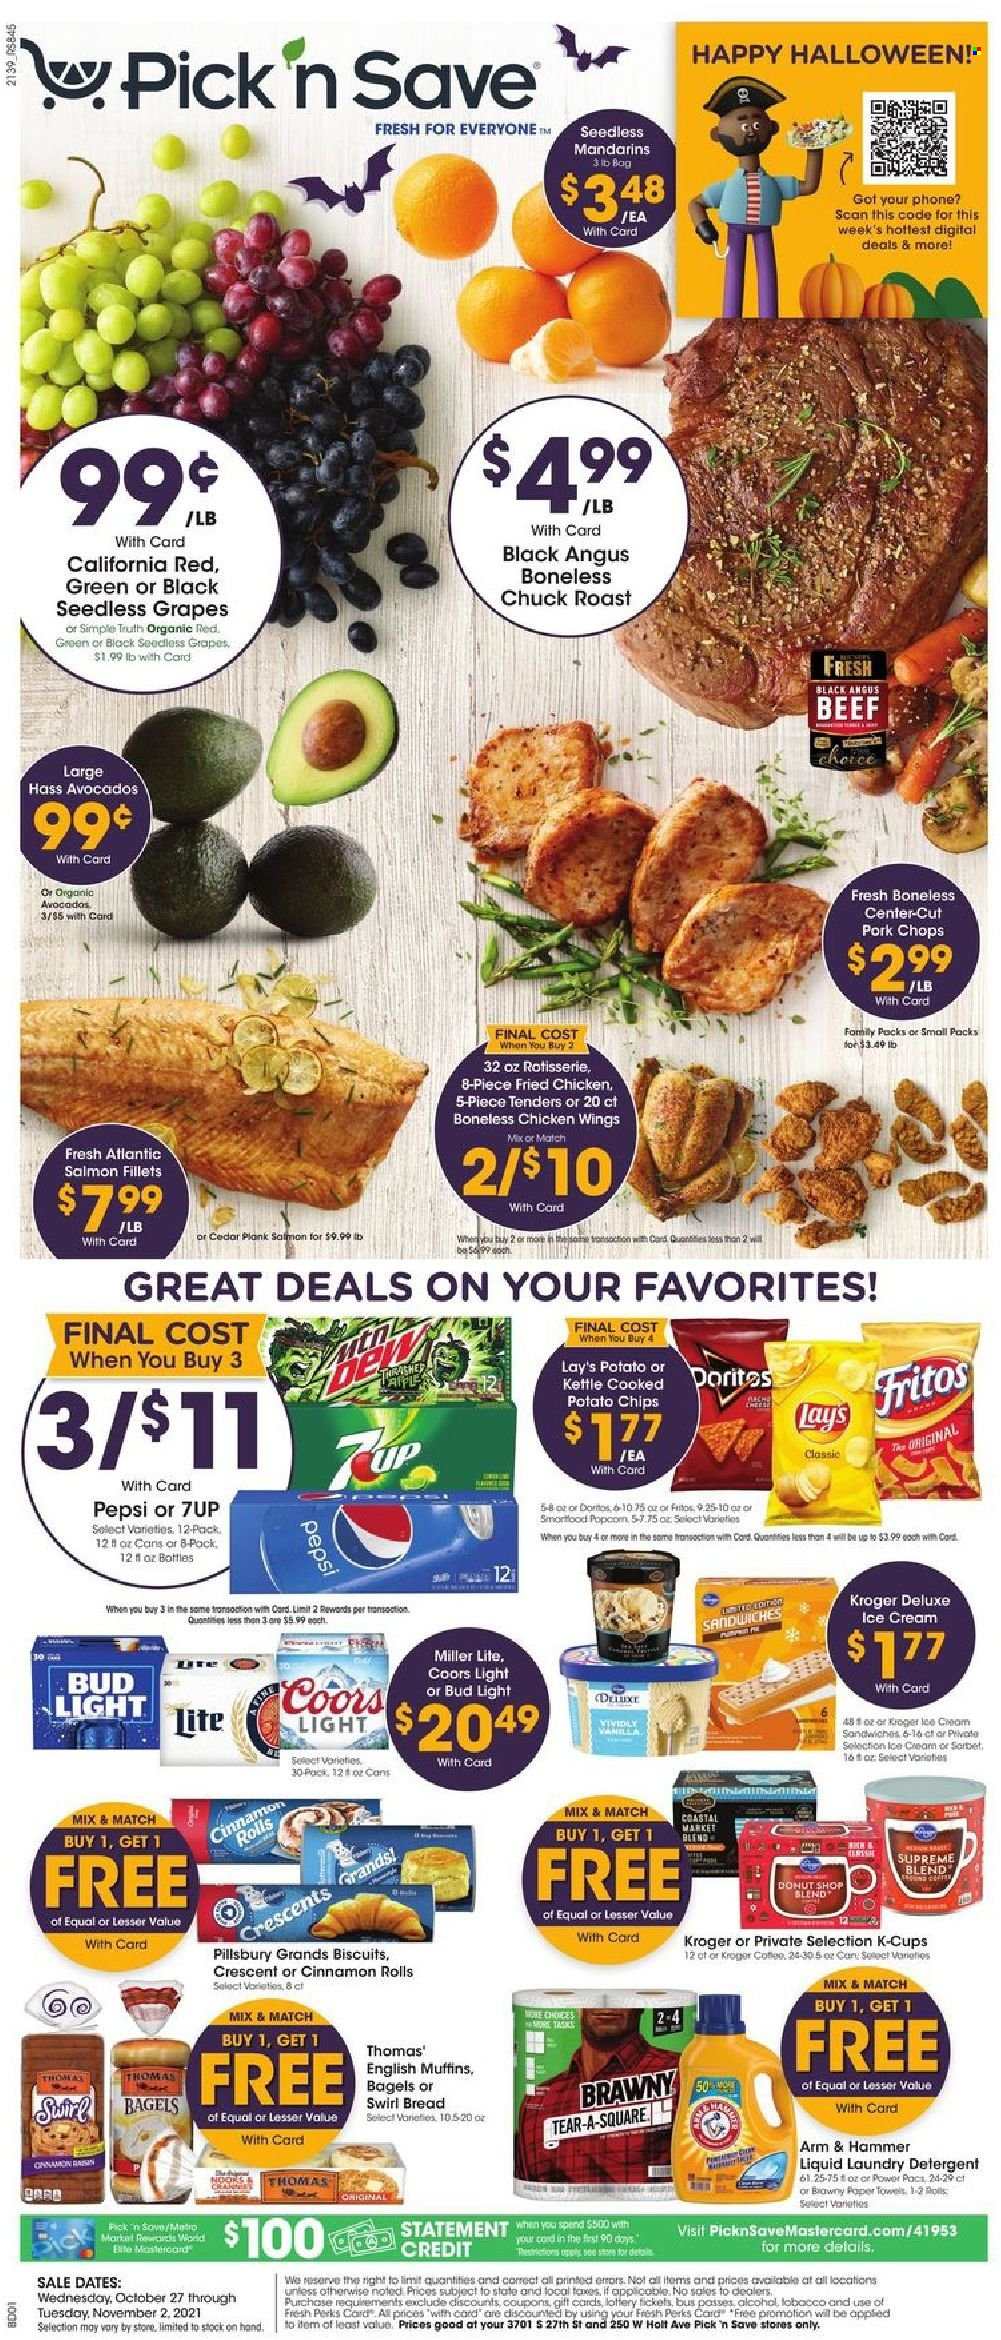 thumbnail - Pick ‘n Save Flyer - 10/27/2021 - 11/02/2021 - Sales products - seedless grapes, bagels, bread, english muffins, cinnamon roll, avocado, grapes, mandarines, salmon, salmon fillet, fried chicken, Pillsbury, ice cream, ice cream sandwich, chicken wings, biscuit, Fritos, potato chips, chips, Lay’s, ARM & HAMMER, Pepsi, 7UP, coffee capsules, K-Cups, beer, Bud Light, beef meat, chuck roast, pork chops, pork meat, detergent, laundry detergent, Halloween, Miller Lite, Coors. Page 1.